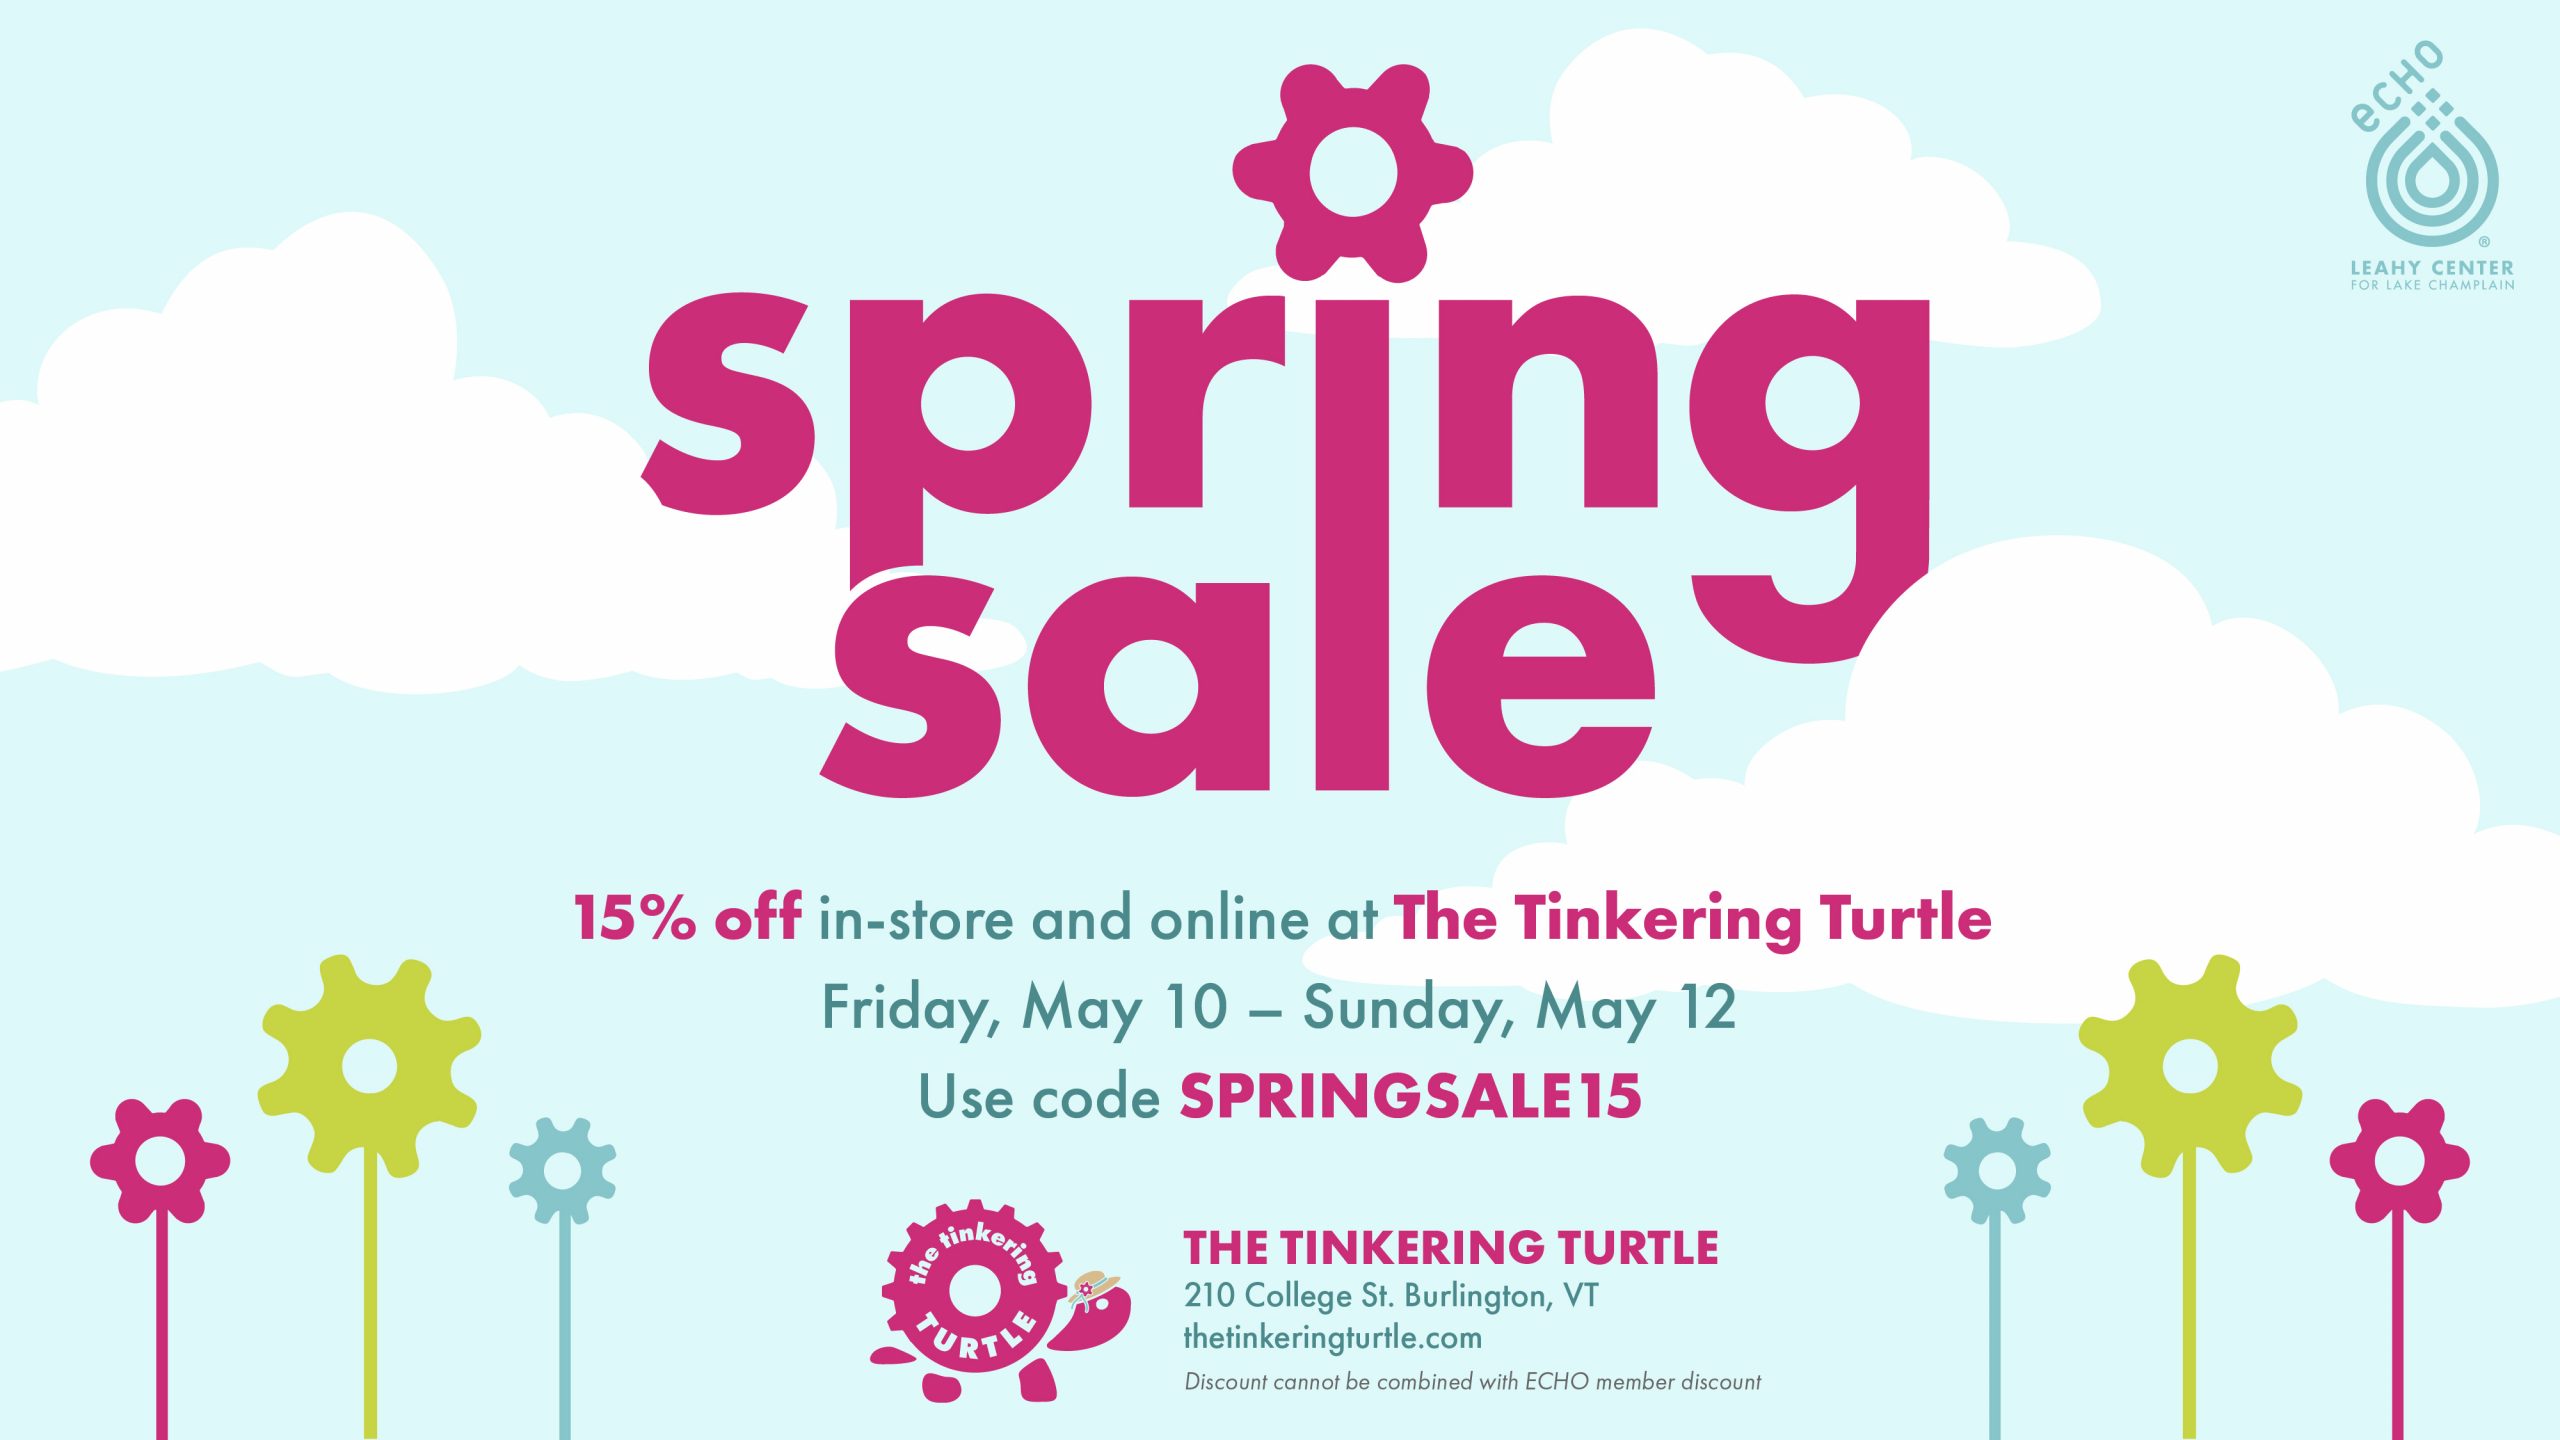 Bright blue graphic with white fluffy clouds and abstract colorful flowers. Text reads "Spring Sale: 15% off in-store and online at The Tinkering Turtle Friday, May 10 thru Sunday, May 12. Use code SPRINGSALE15." Tinkering turtle logo. Bottom text reads "The Tinkering Turtle, 210 College St., Burlington, VT. thetinkeringturtle.com. Discount cannot be combined with ECHO member discount."